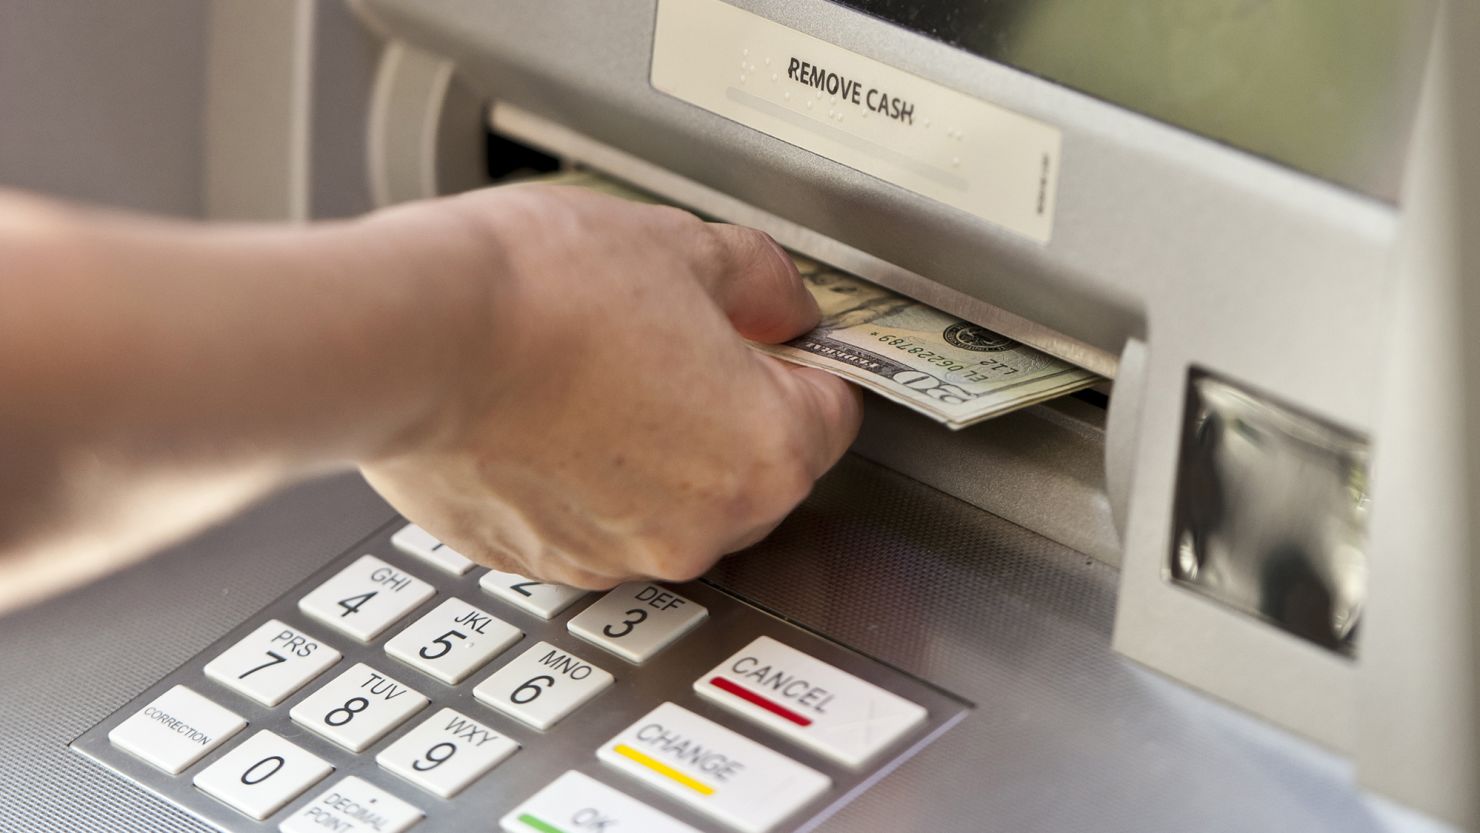 A proposed rule by the Consumer Financial Protection Bureau to curb overdraft fees would only apply to banks and credit unions with at least $10 billion in assets.